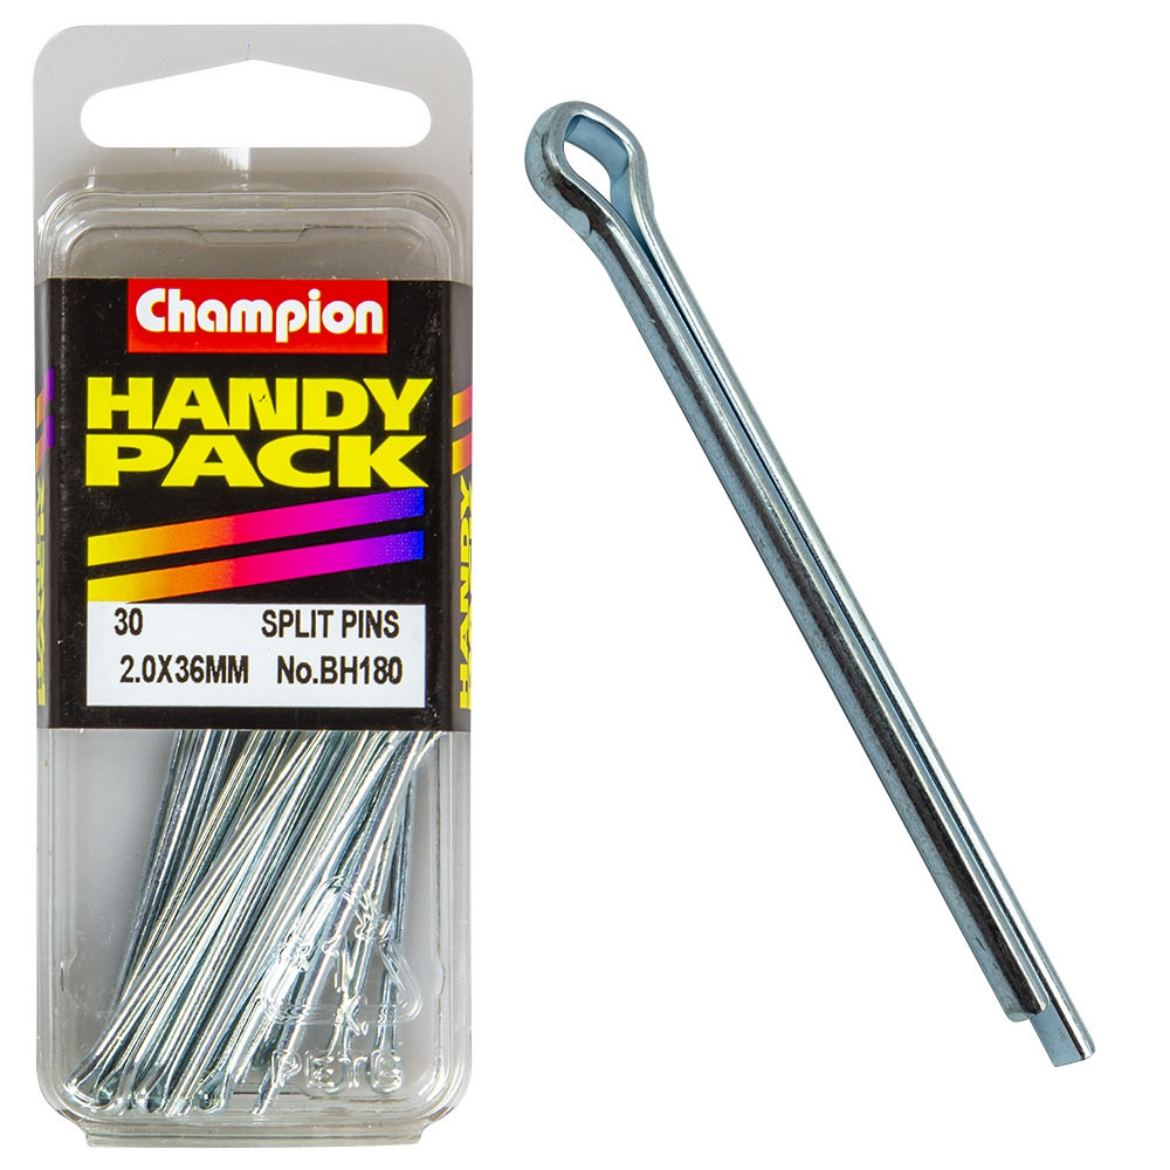 Picture of Handy Pk Split Pins 2 x 36mm CPS (Pkt.30)